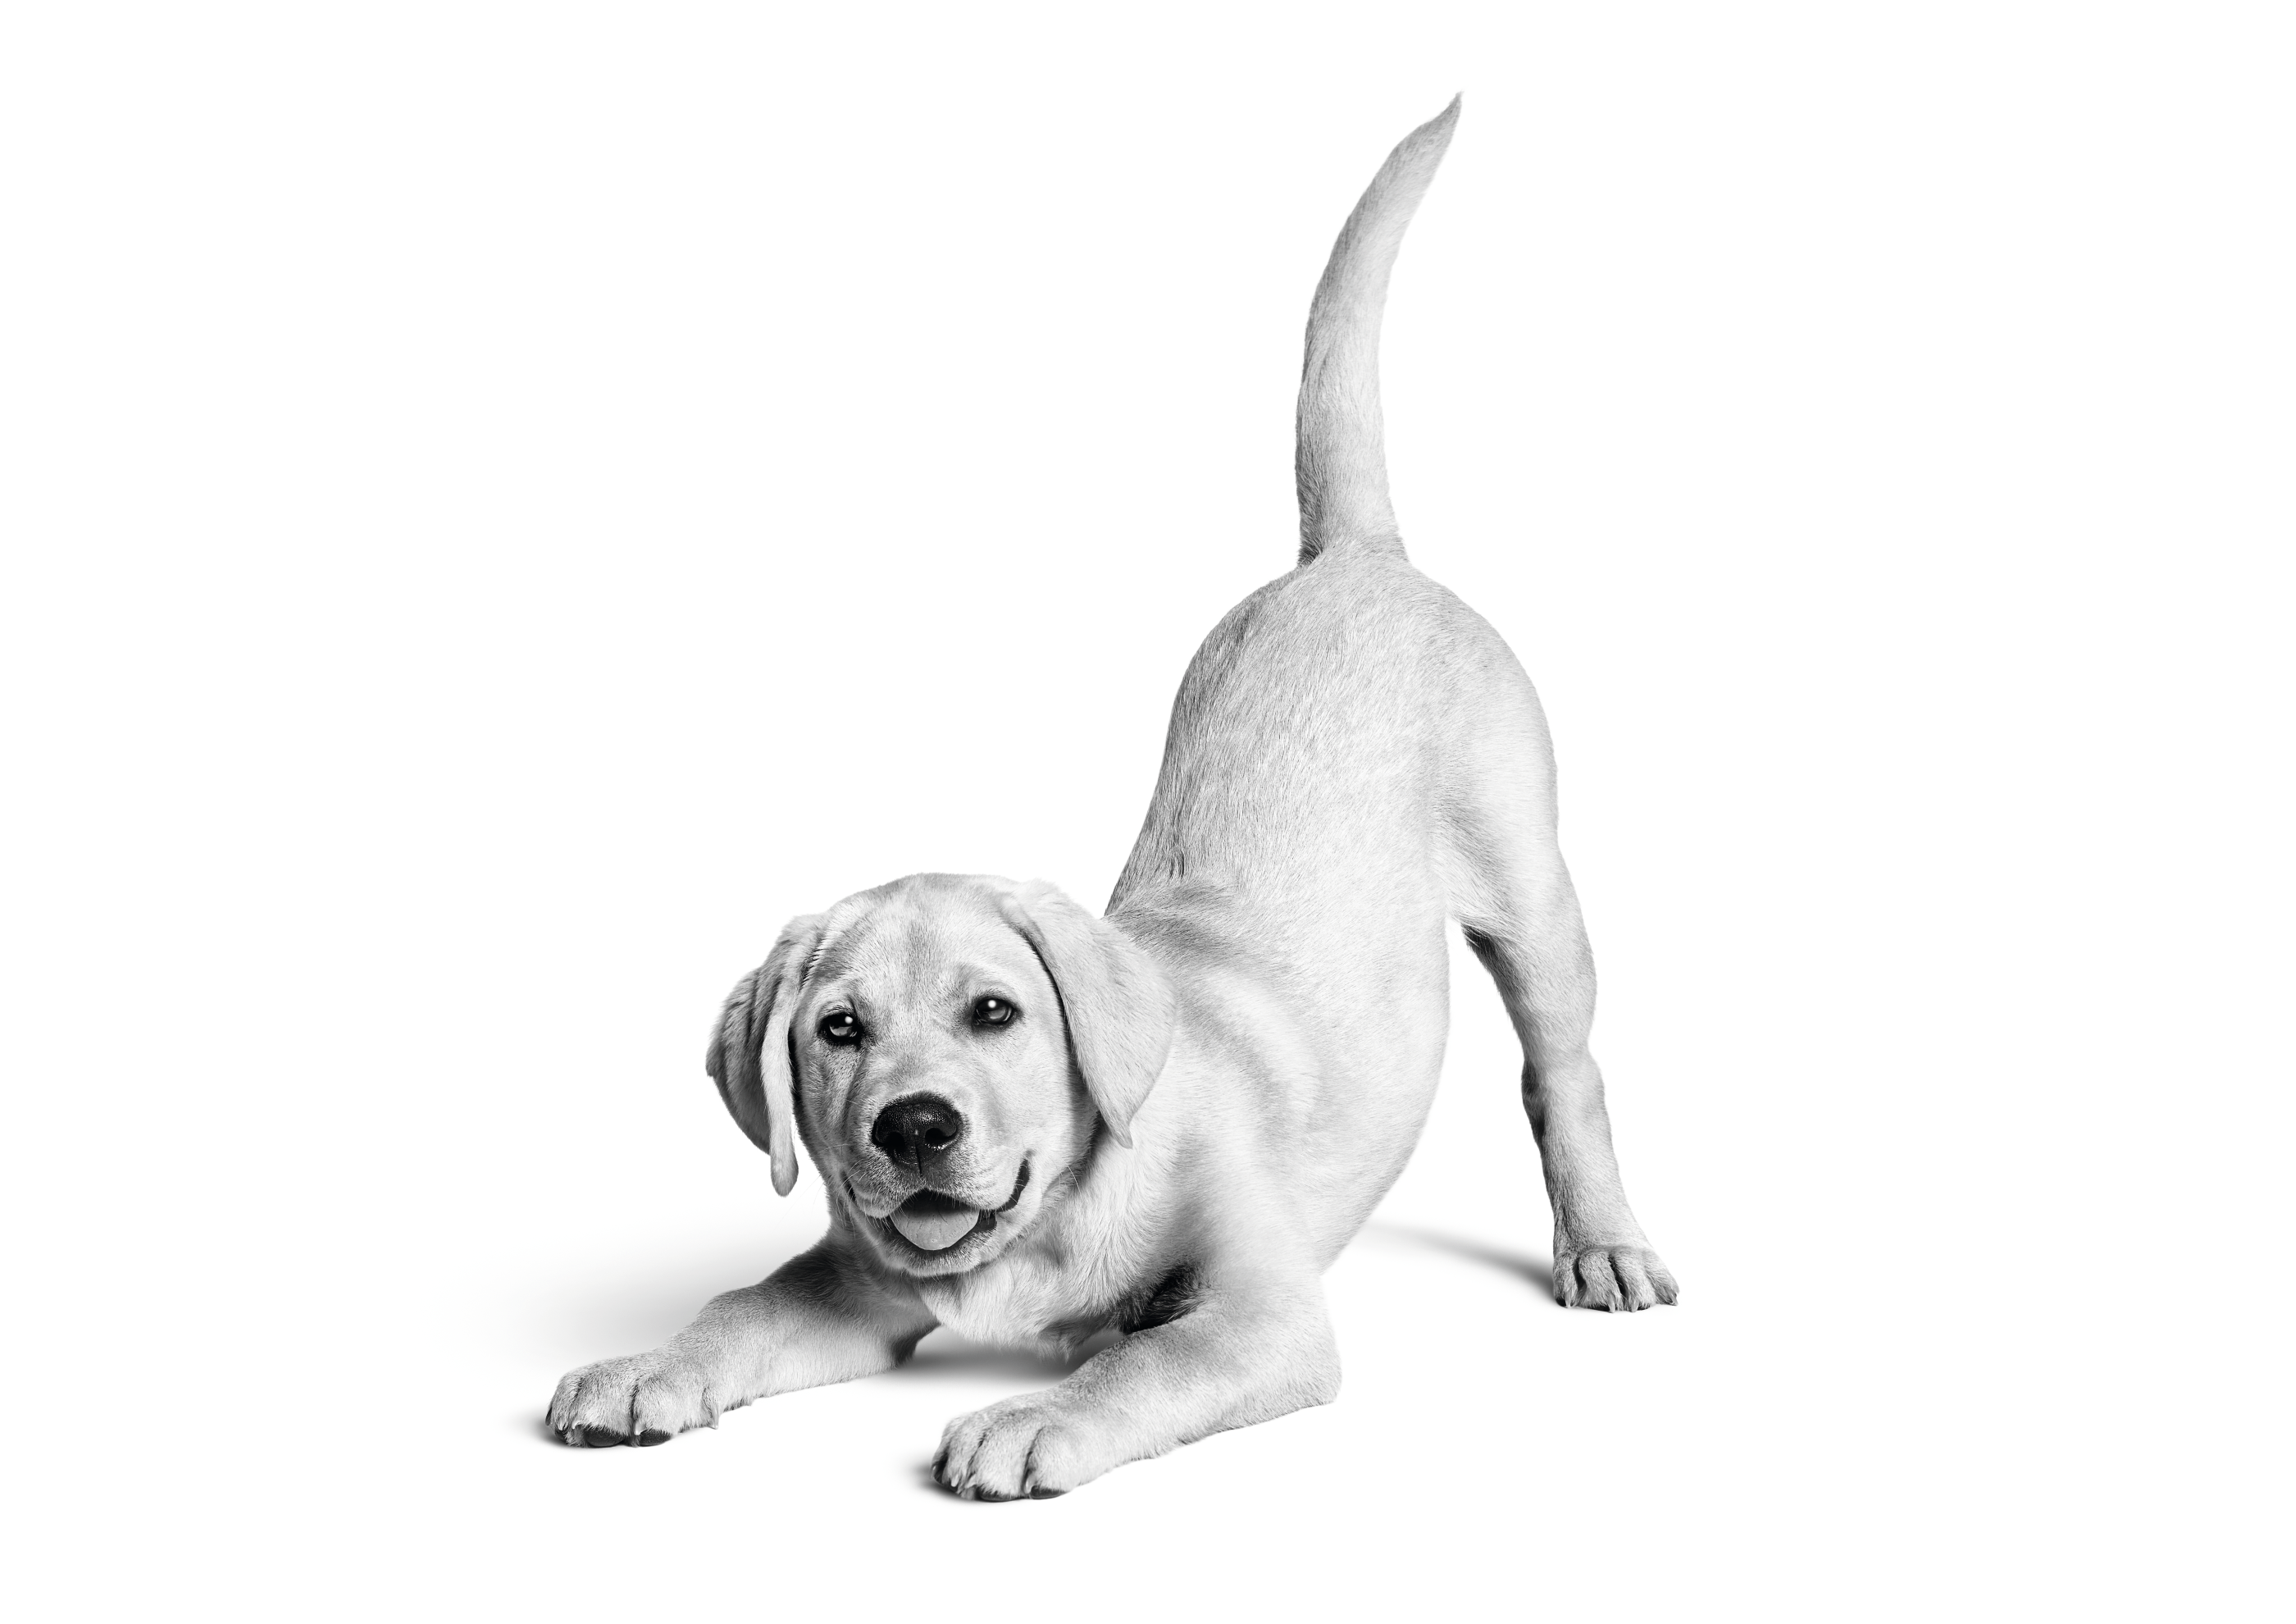 Labrador puppy standing in black and white on a white background